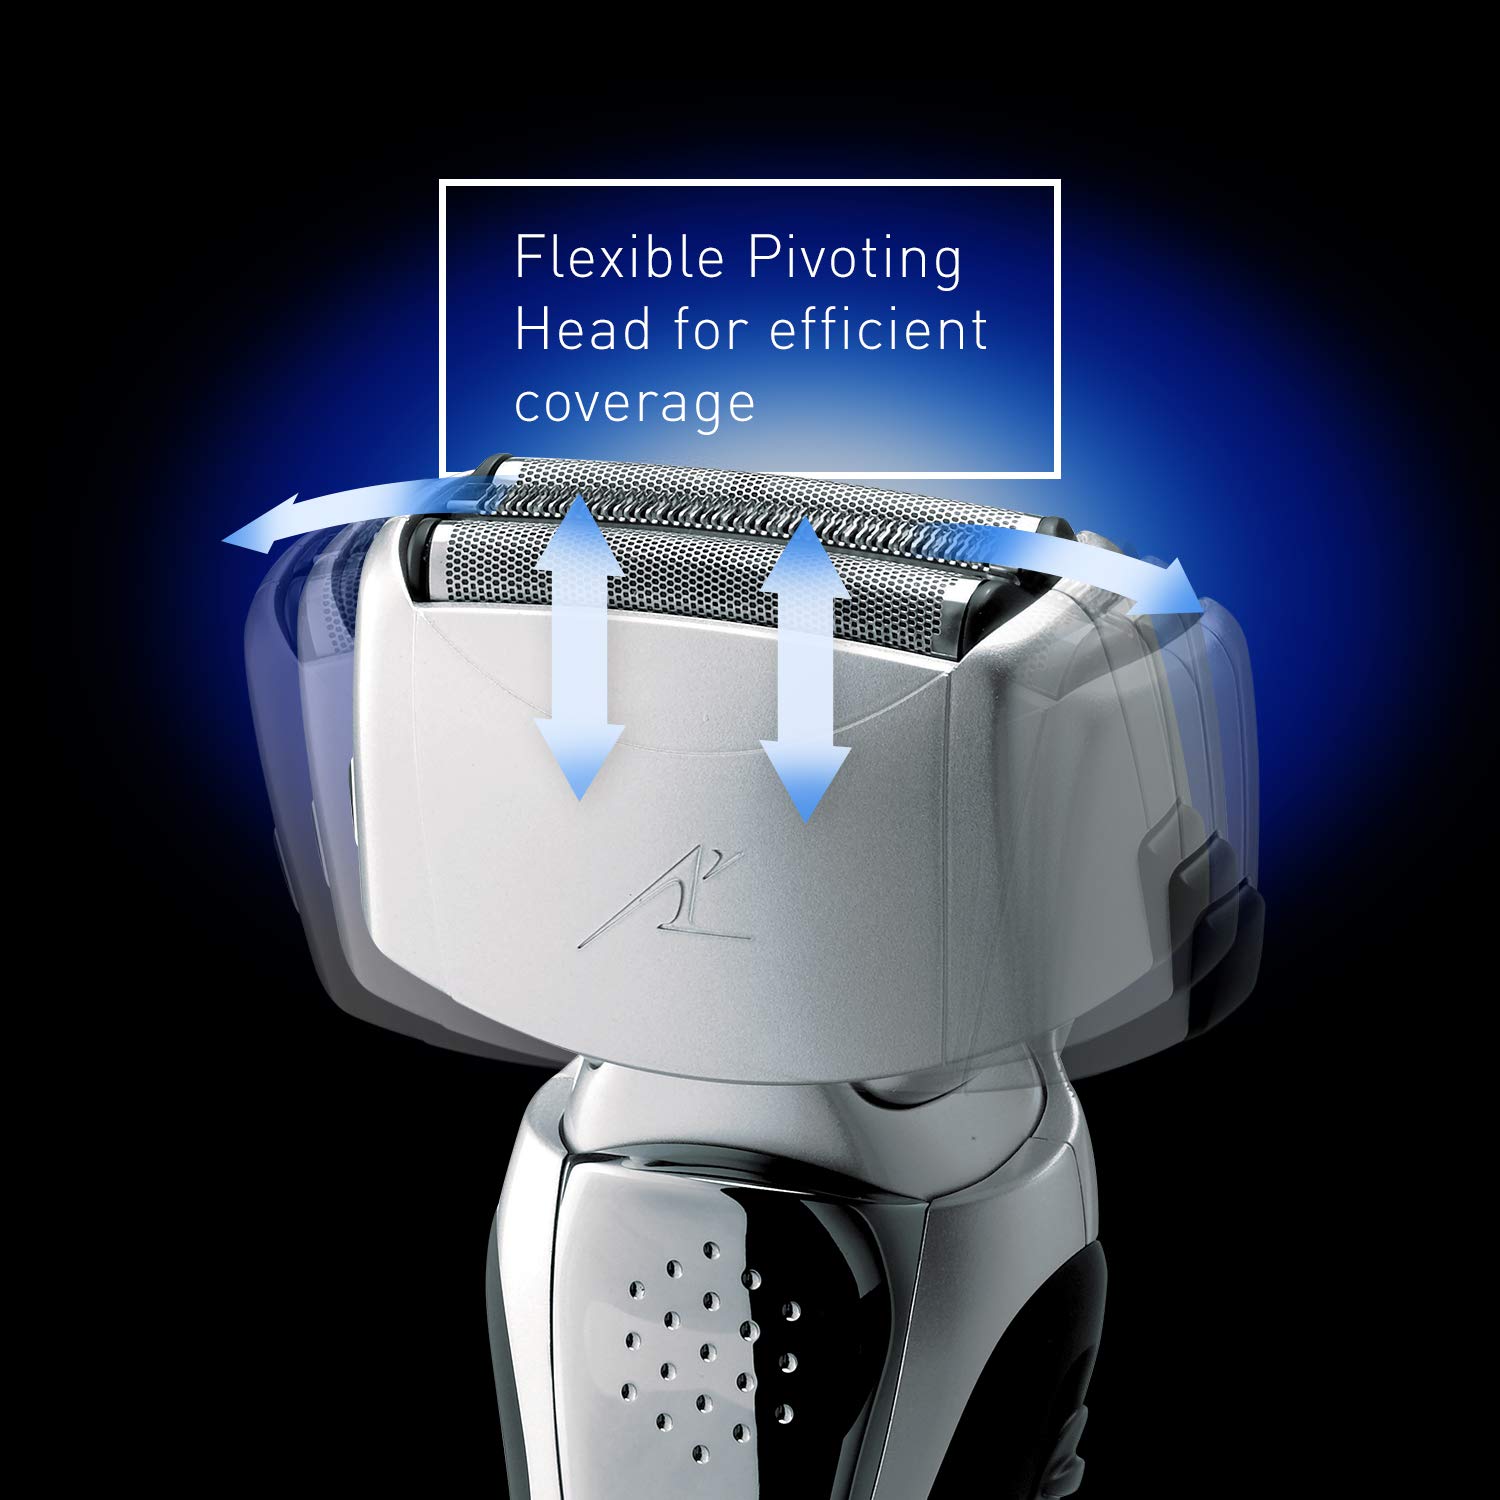 Panasonic Electric Shaver and Trimmer for Men ES8103S Arc3, Wet/Dry with 3 Nanotech Blades and Flexible Pivoting Head